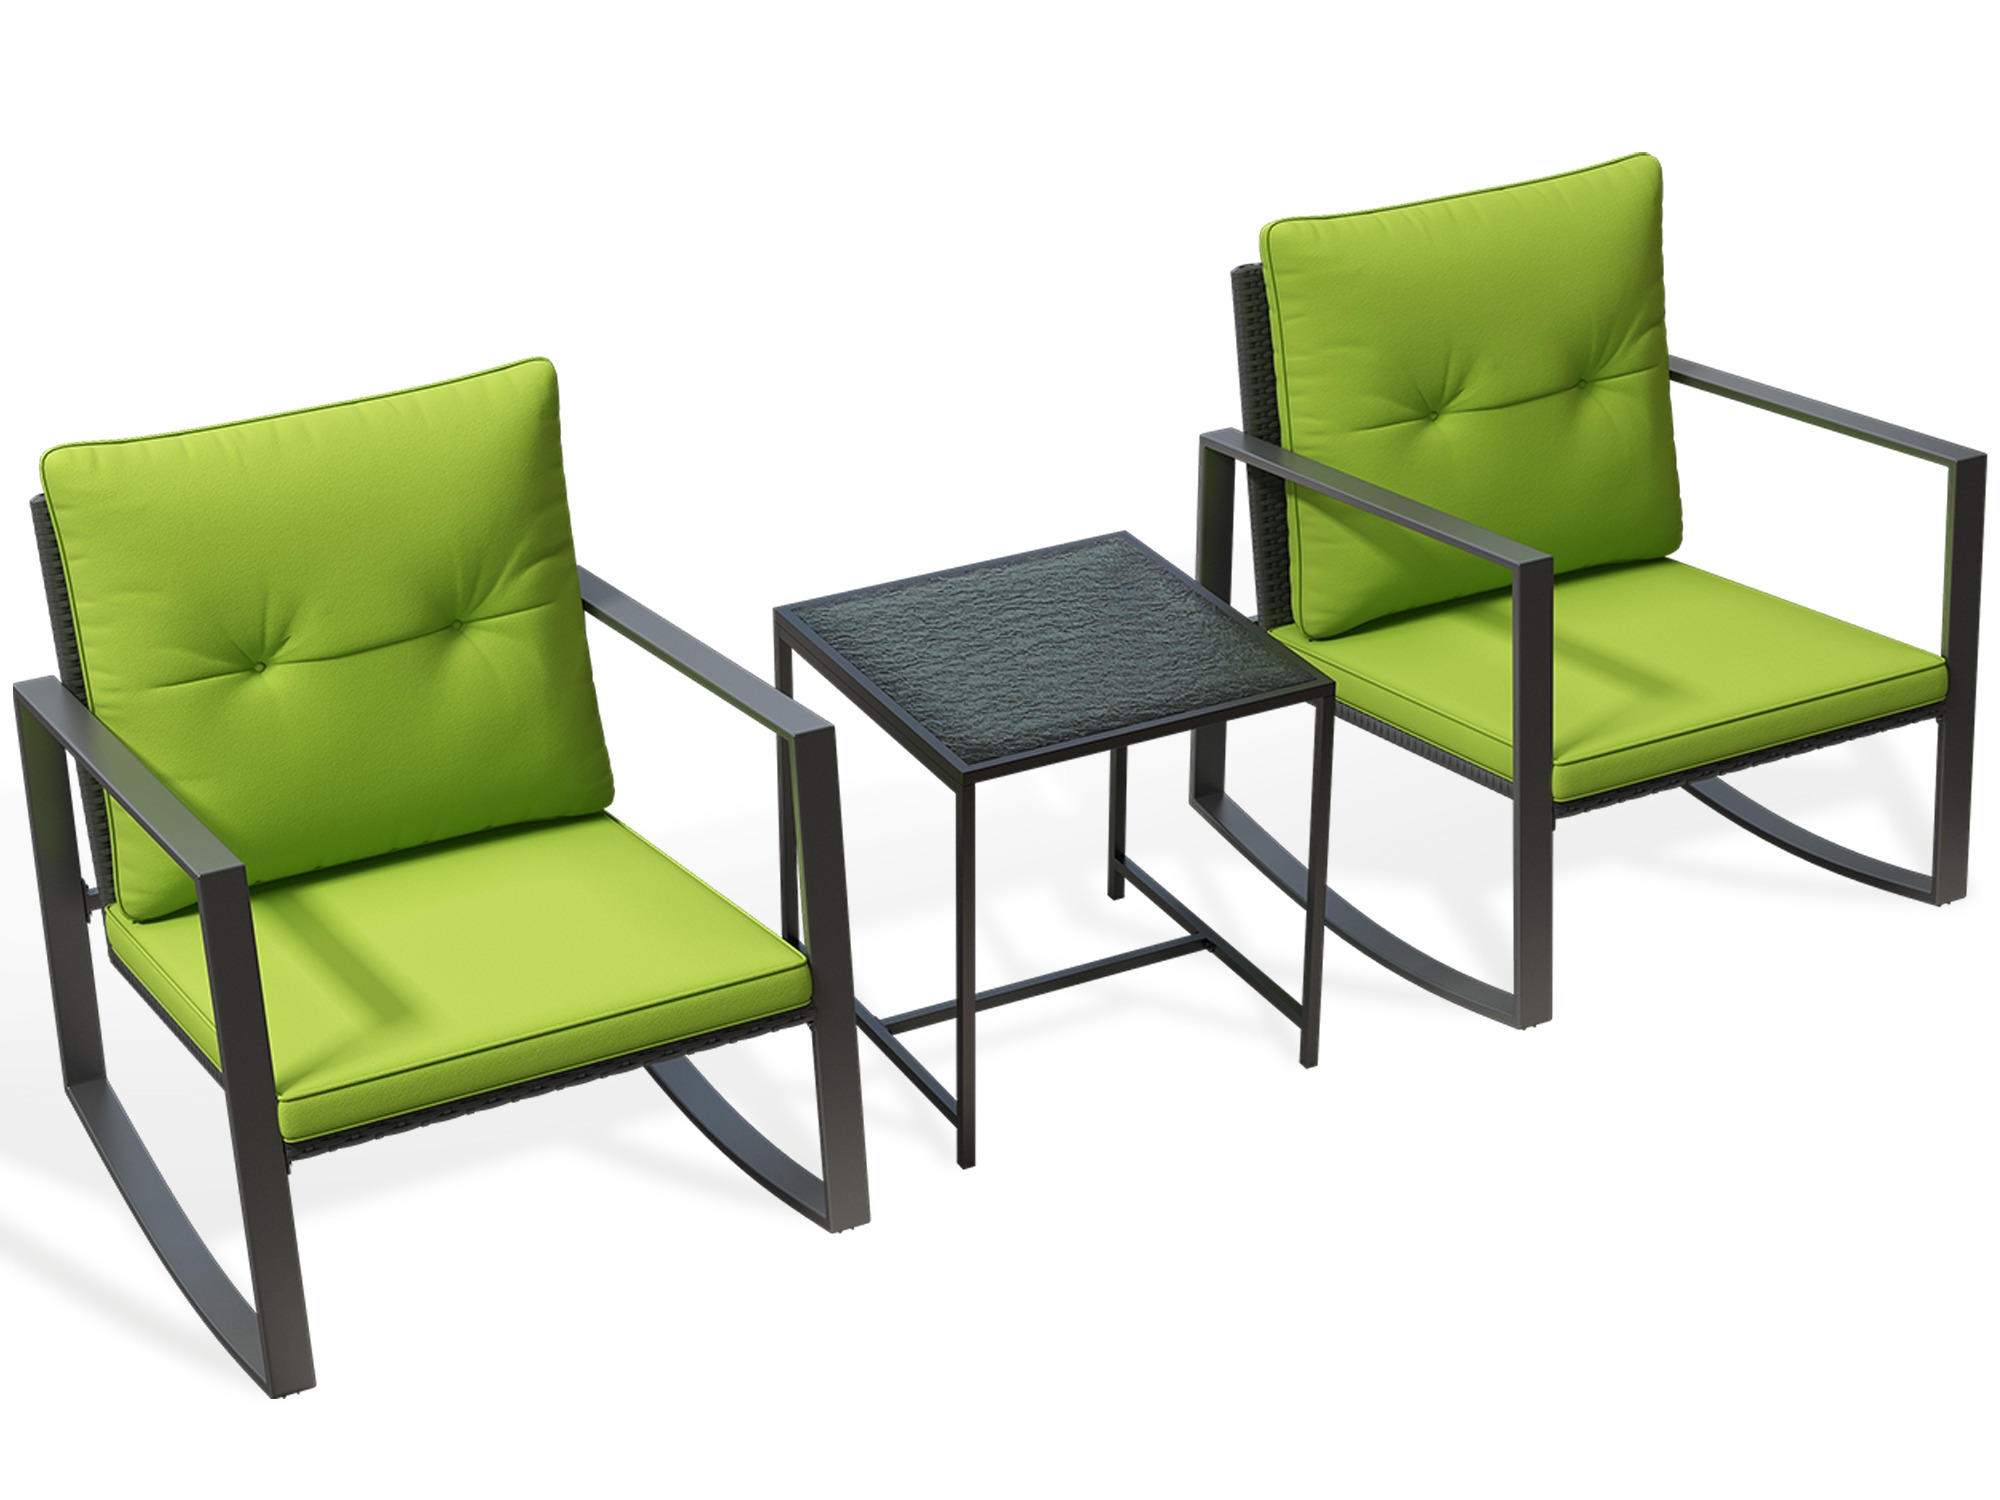 Fleur 3-Piece Patio Furniture Set -Two Solid Relaxing Chairs With Glass Garden Coffee Table - Green - image 1 of 9